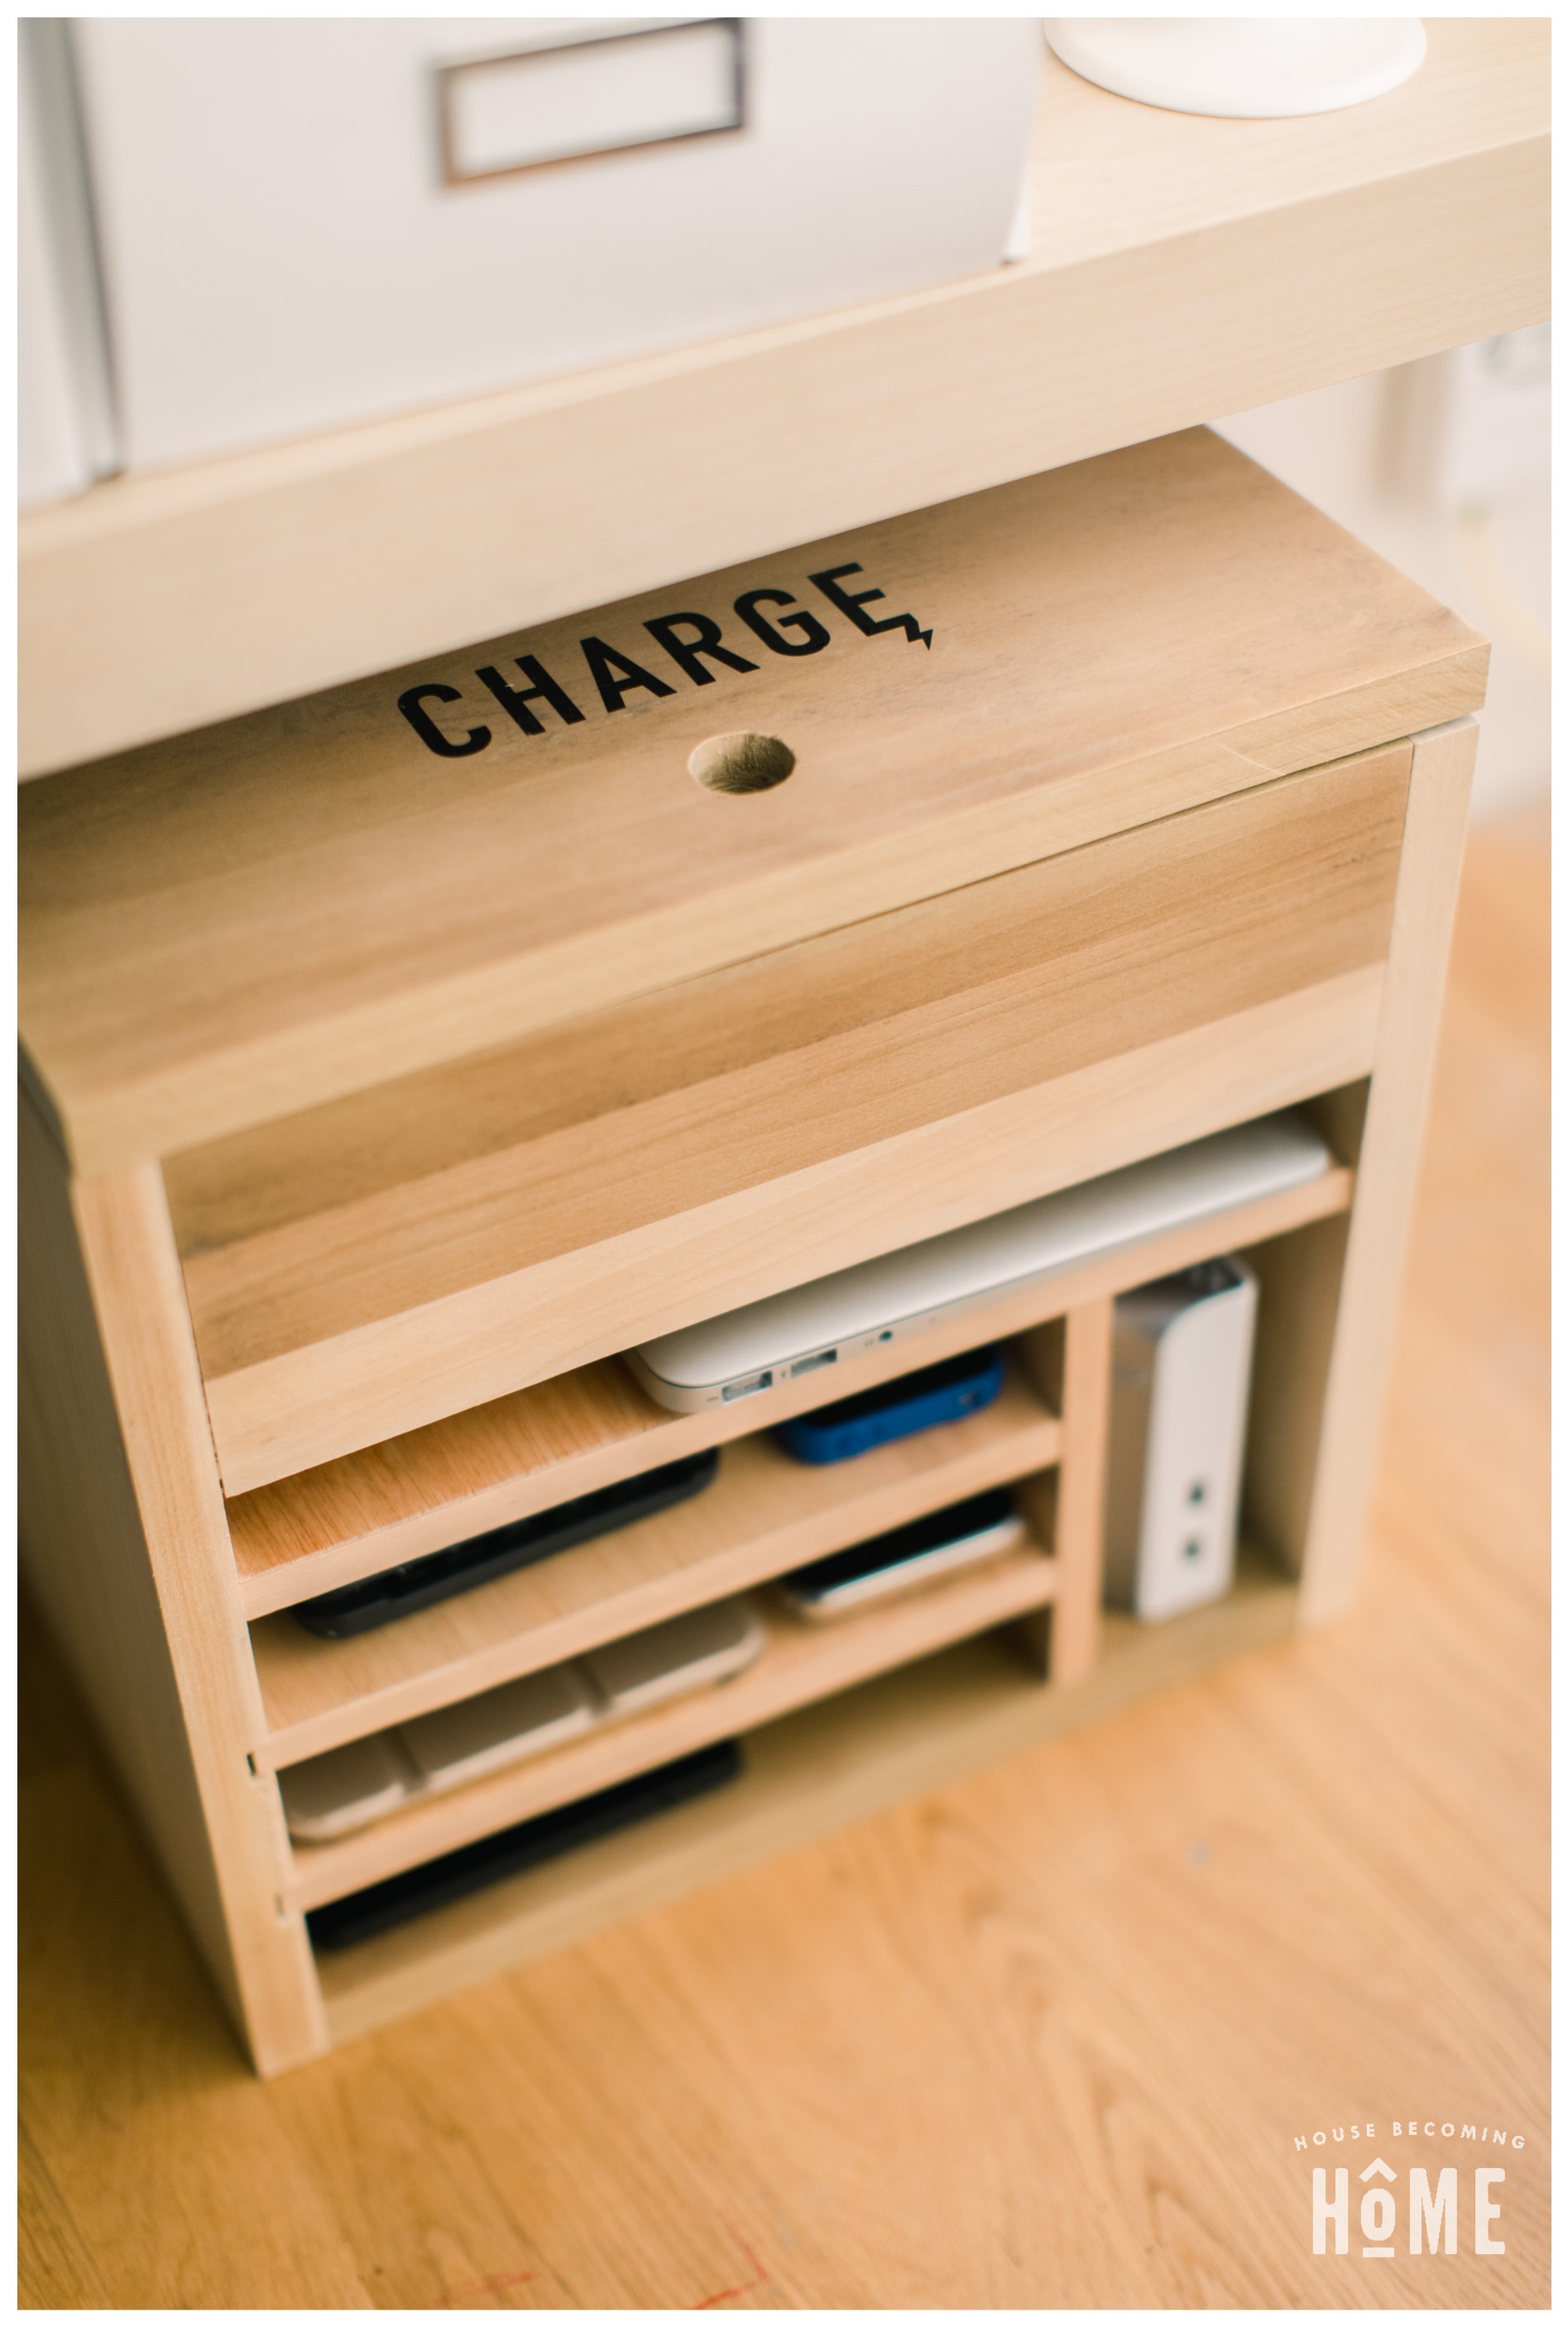 How To Make A Diy Charging Station For Electronic Devices,Best Bright Color Combinations